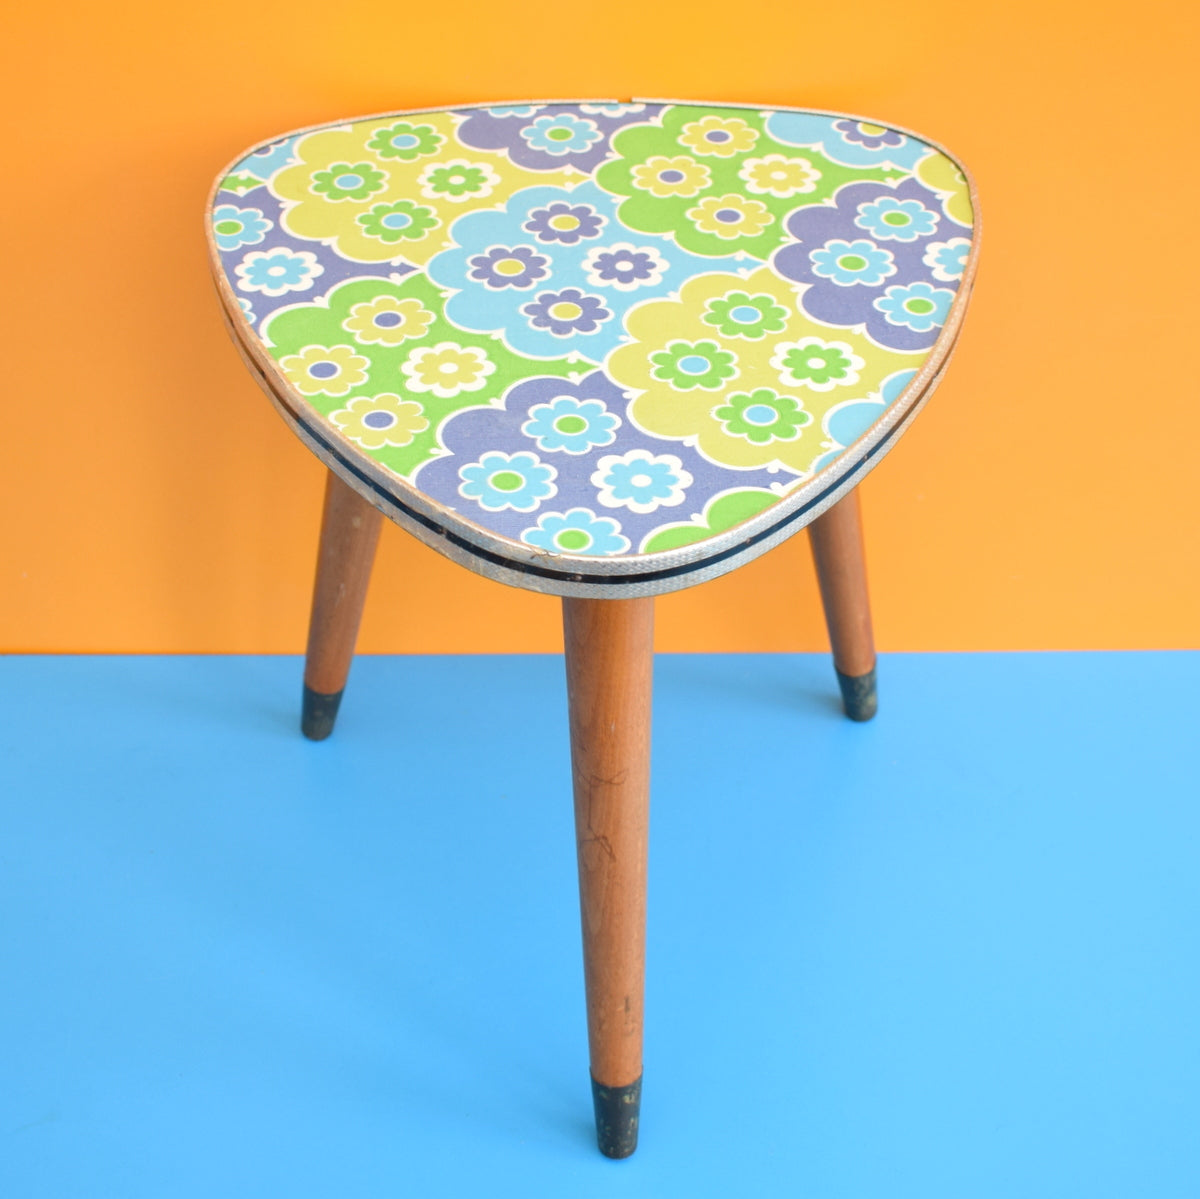 Vintage 1960s Small Triangular Side Table - Blue Flower Print